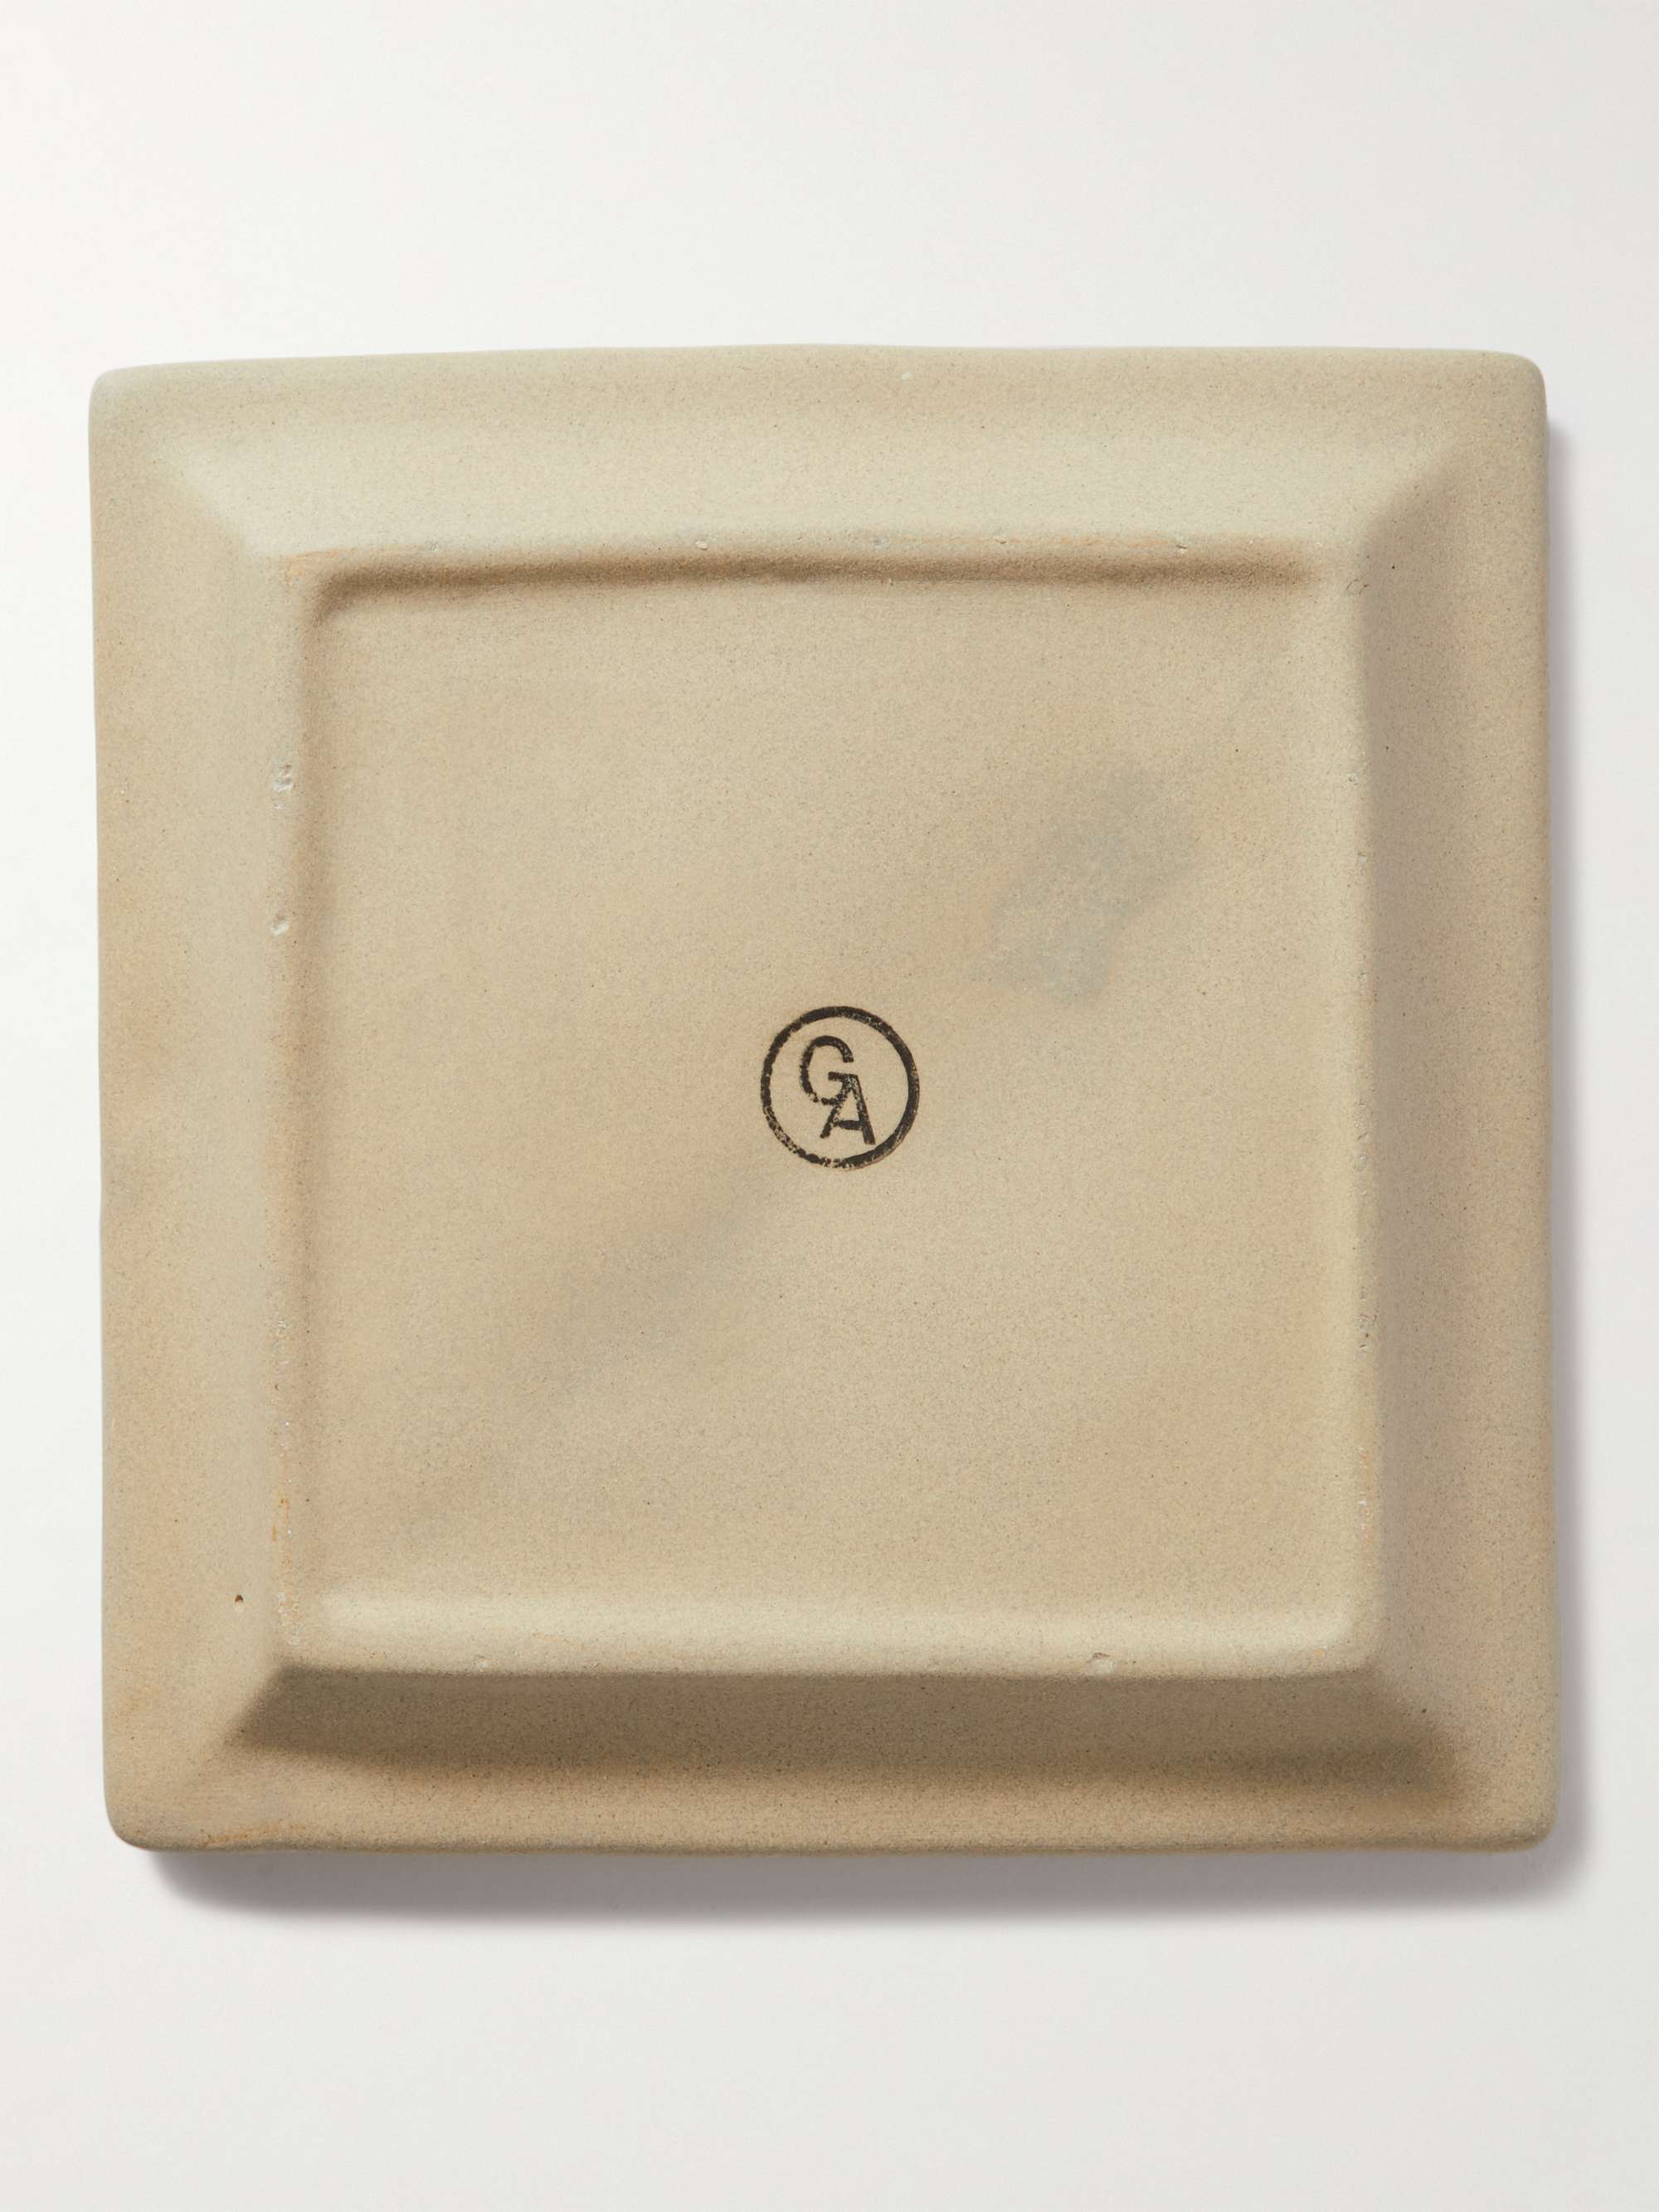 GENERAL ADMISSION Glazed Earthenware Clay Ashtray